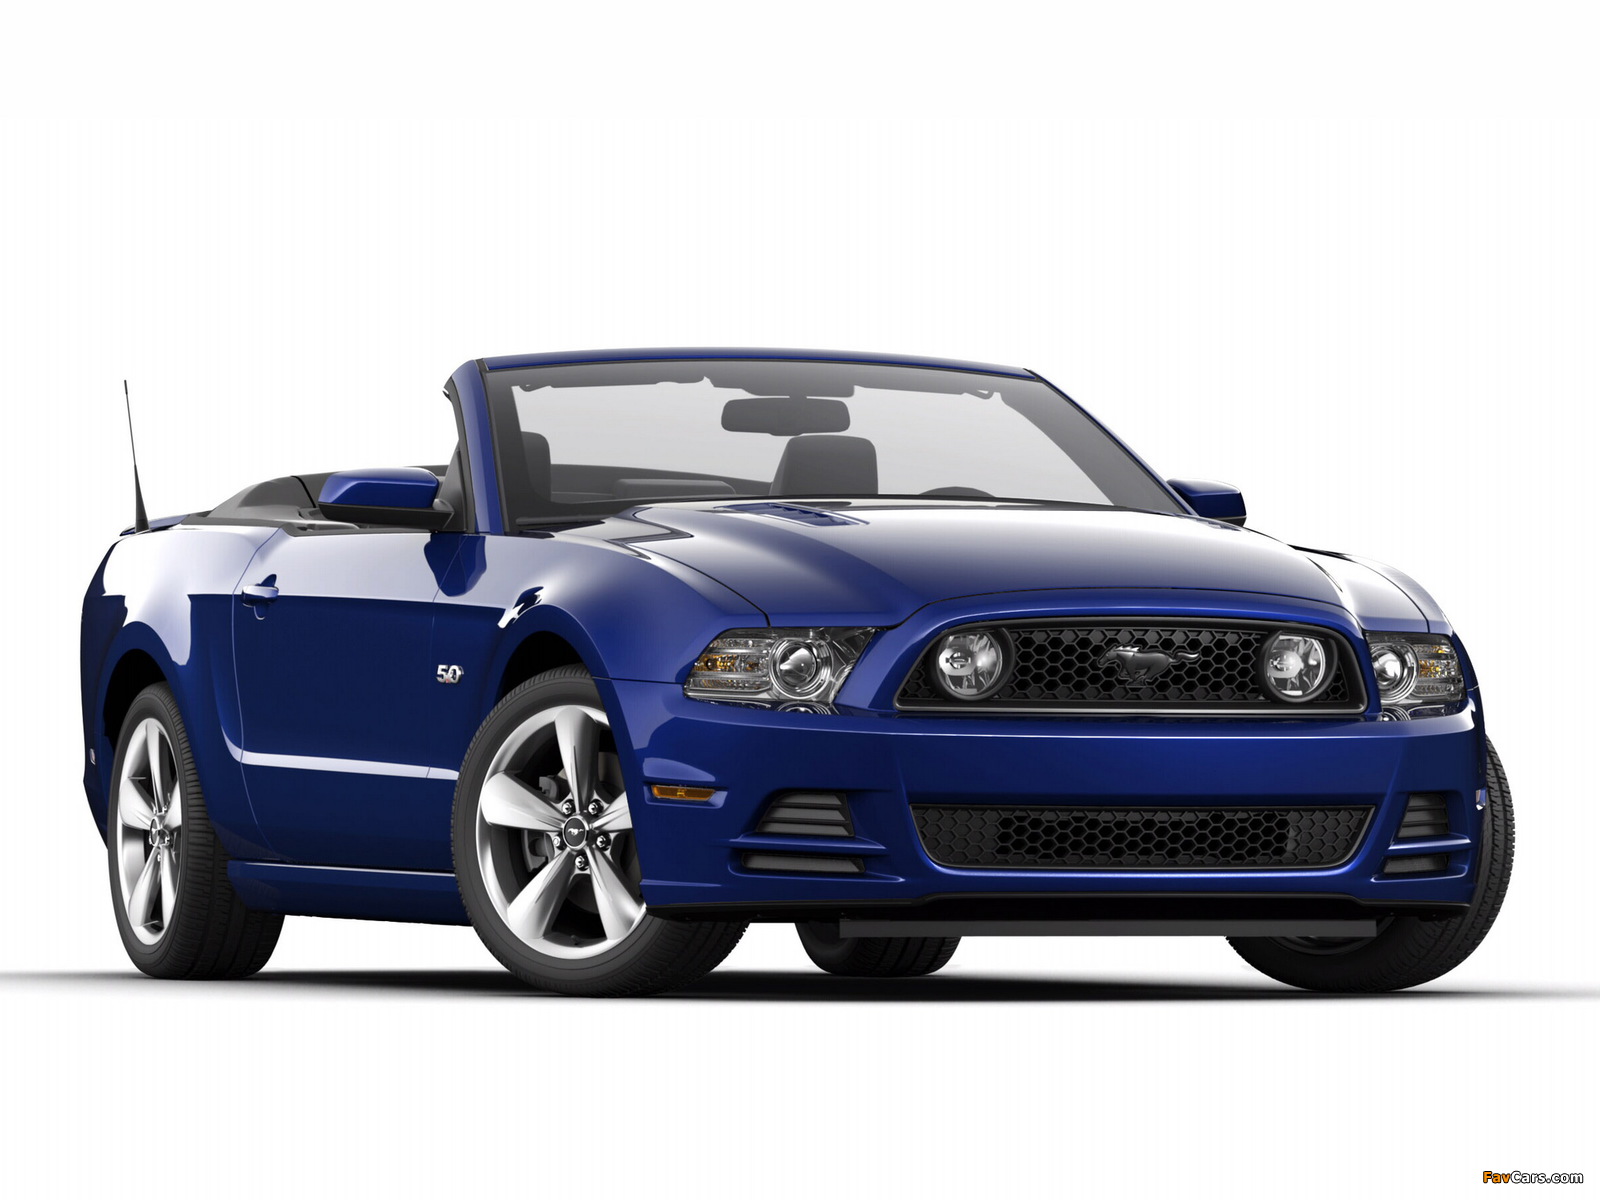 Mustang 5.0 GT Convertible 2012 pictures (1600 x 1200)